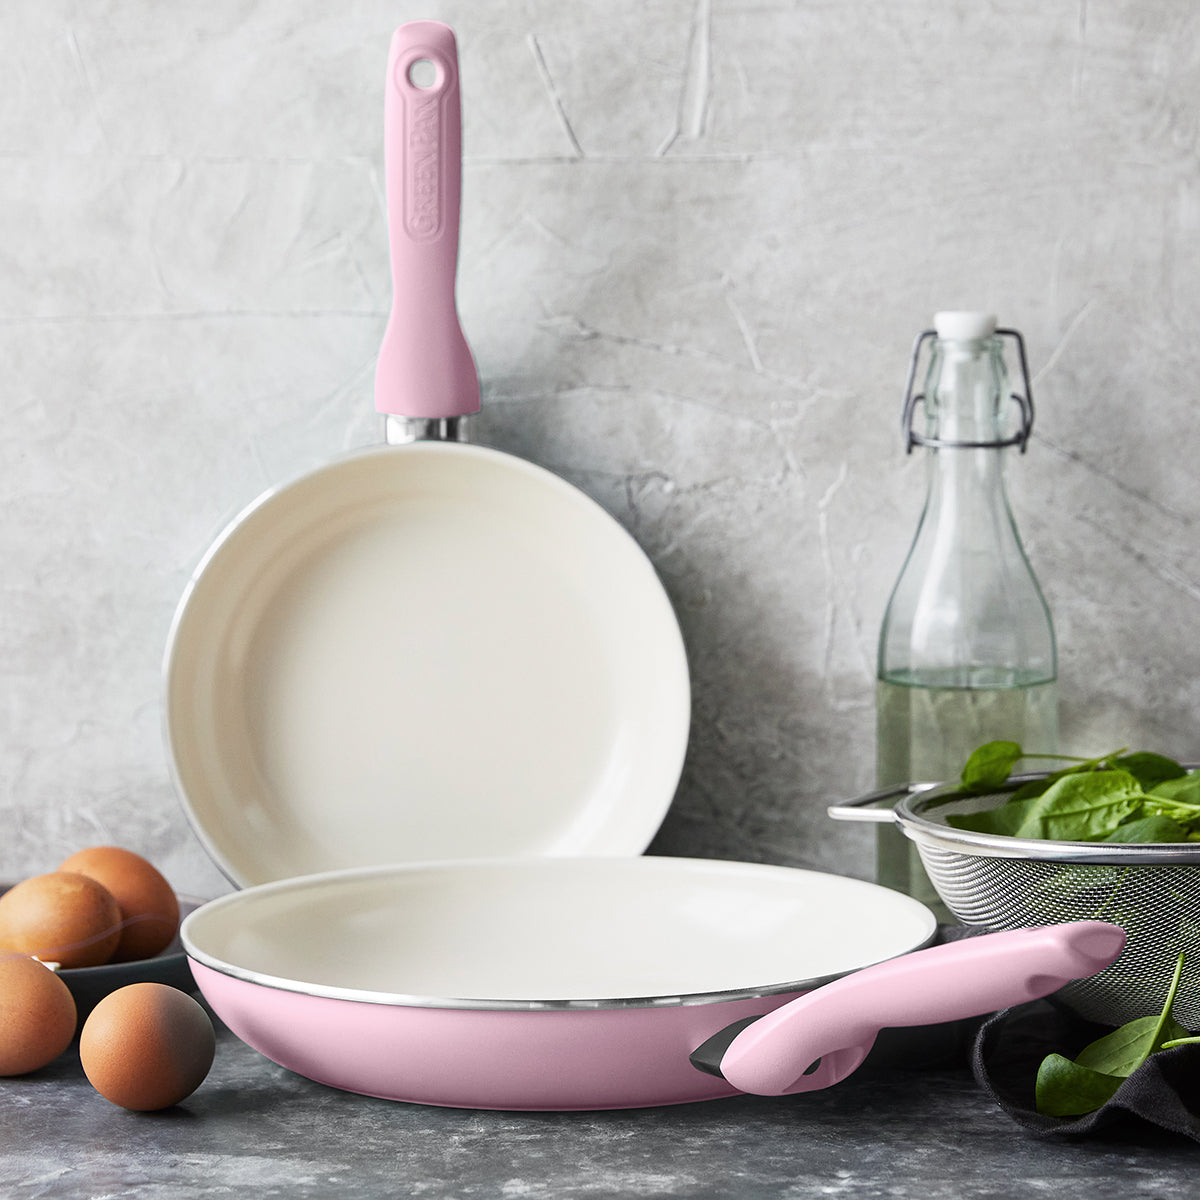 Nonstick Frying Pan Set with Lid, 8 9.5 and 11 Non stick Frying Pan Set,  Pink Pan Frying Pan Skillet Set Omelette Pan Healthy Stone Cookware, PFOA